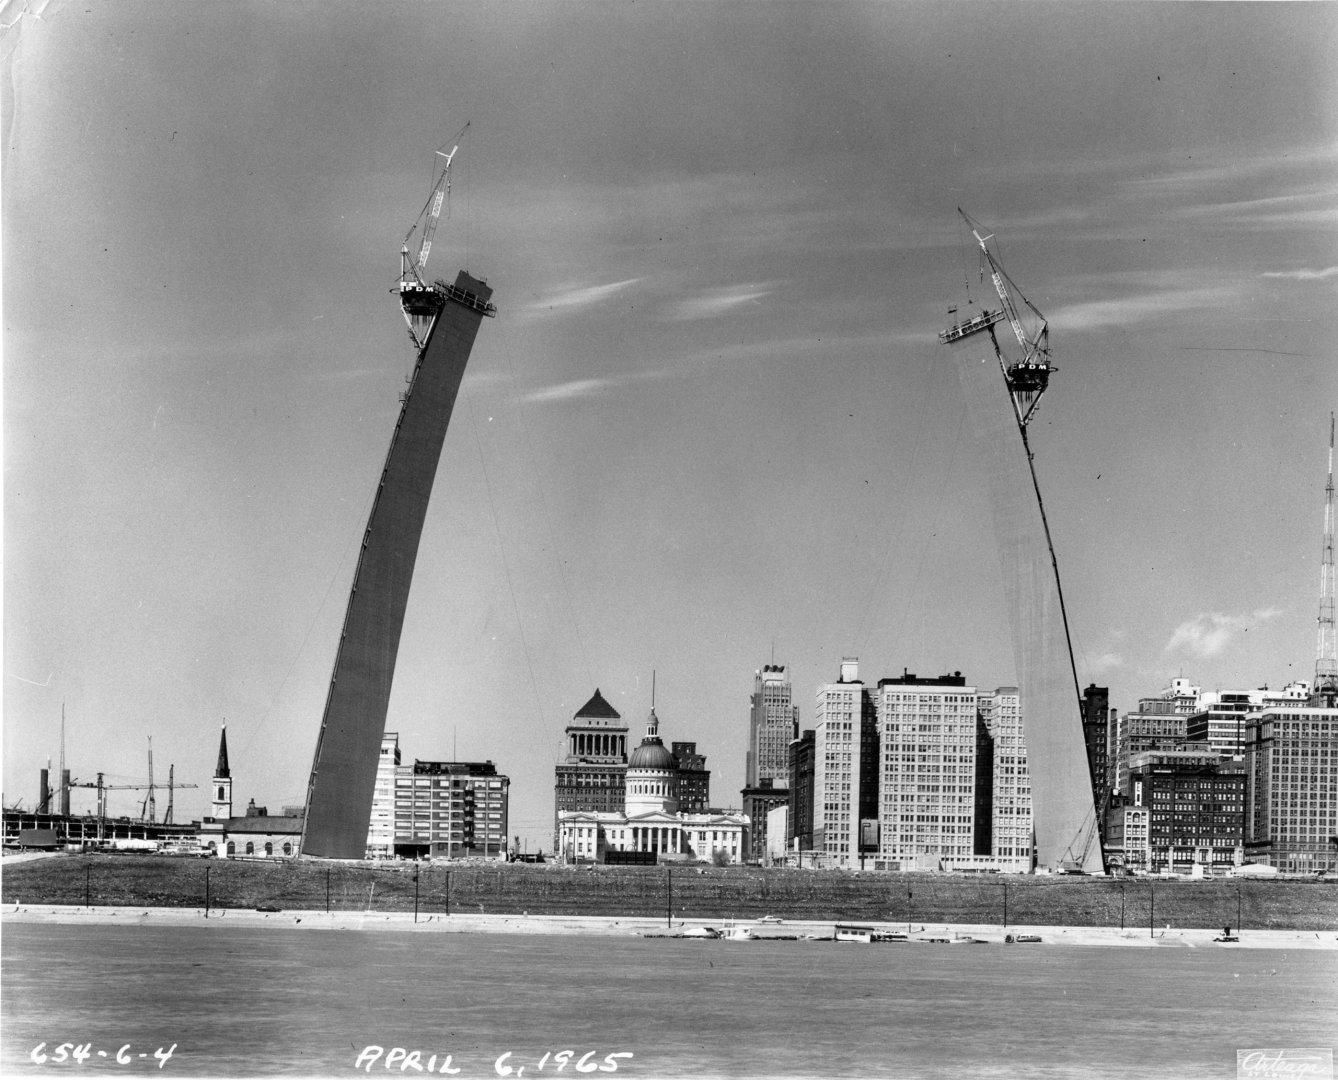 Arch Construction, April 6, 1965. The North leg is 447 feet tall and South leg is 458 feet tall at this point.